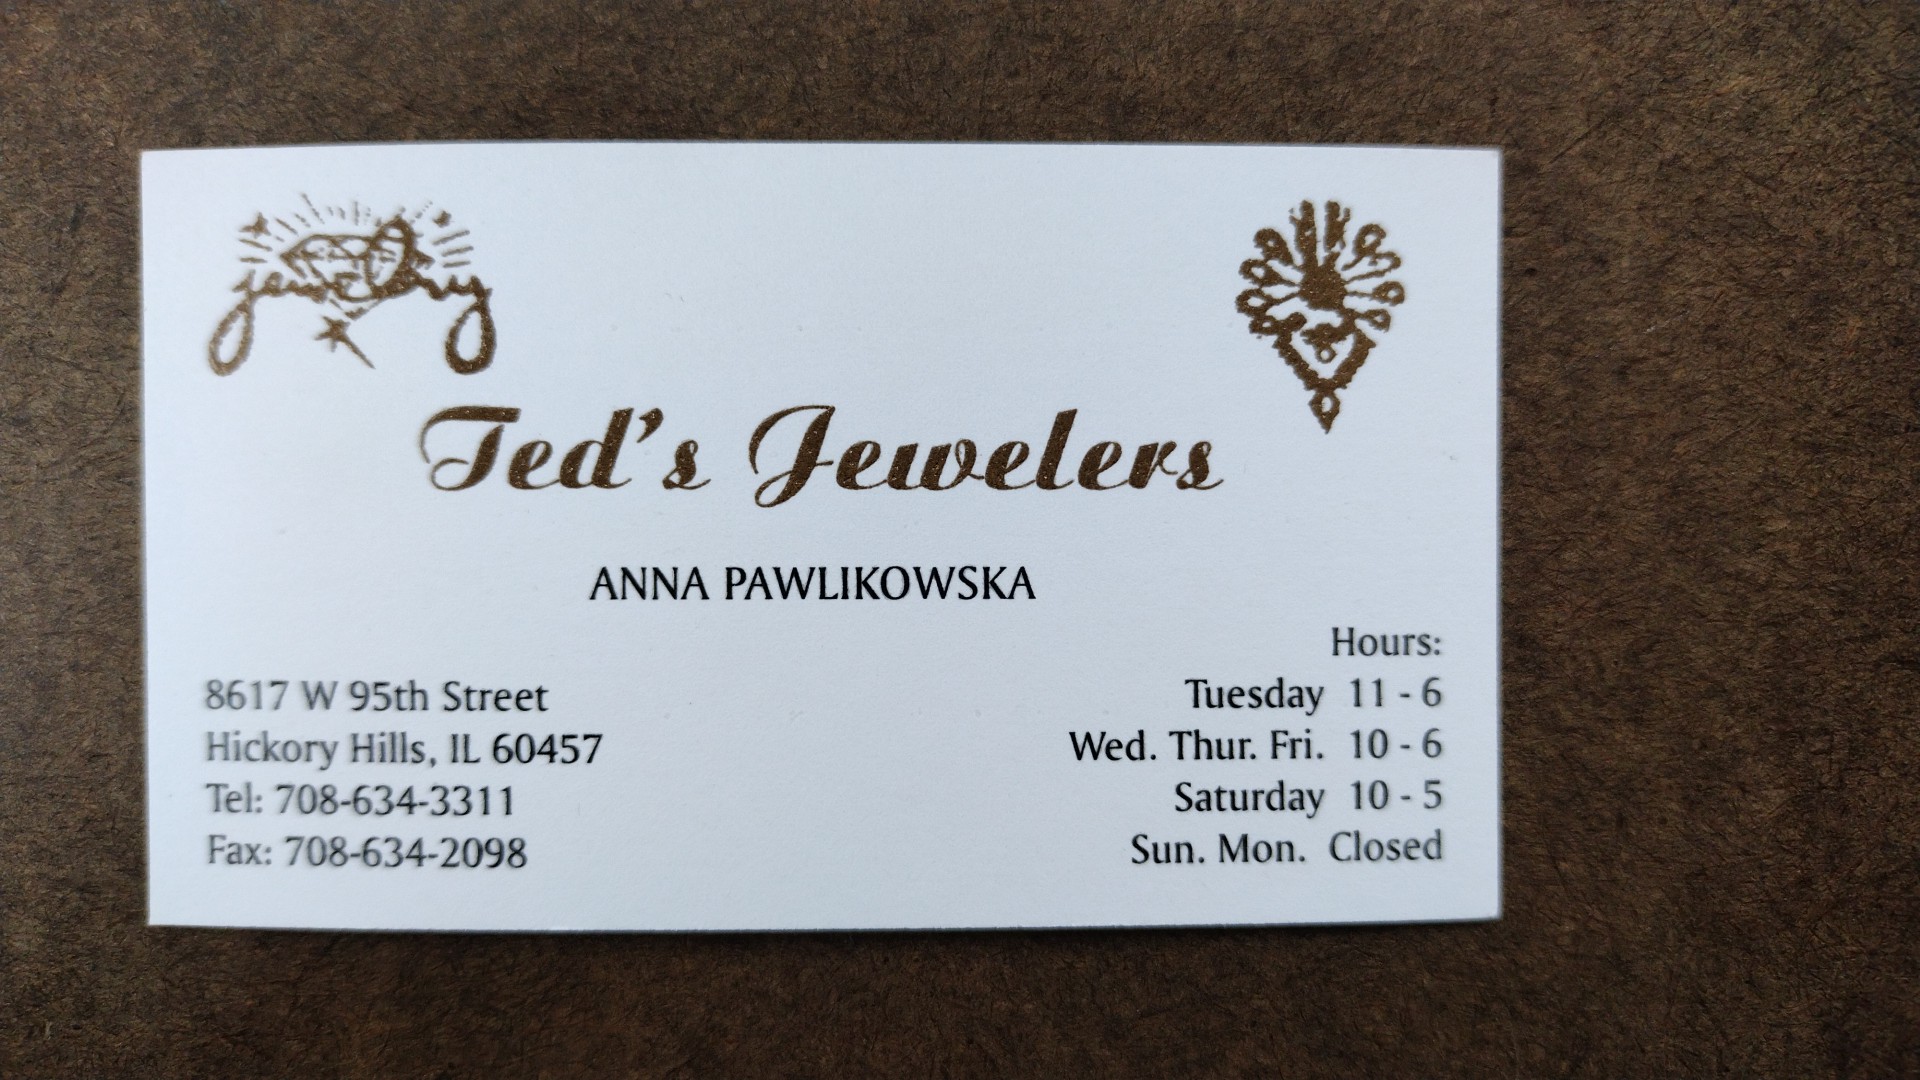 Ted's Jewelers 8617 95th St, Hickory Hills Illinois 60457